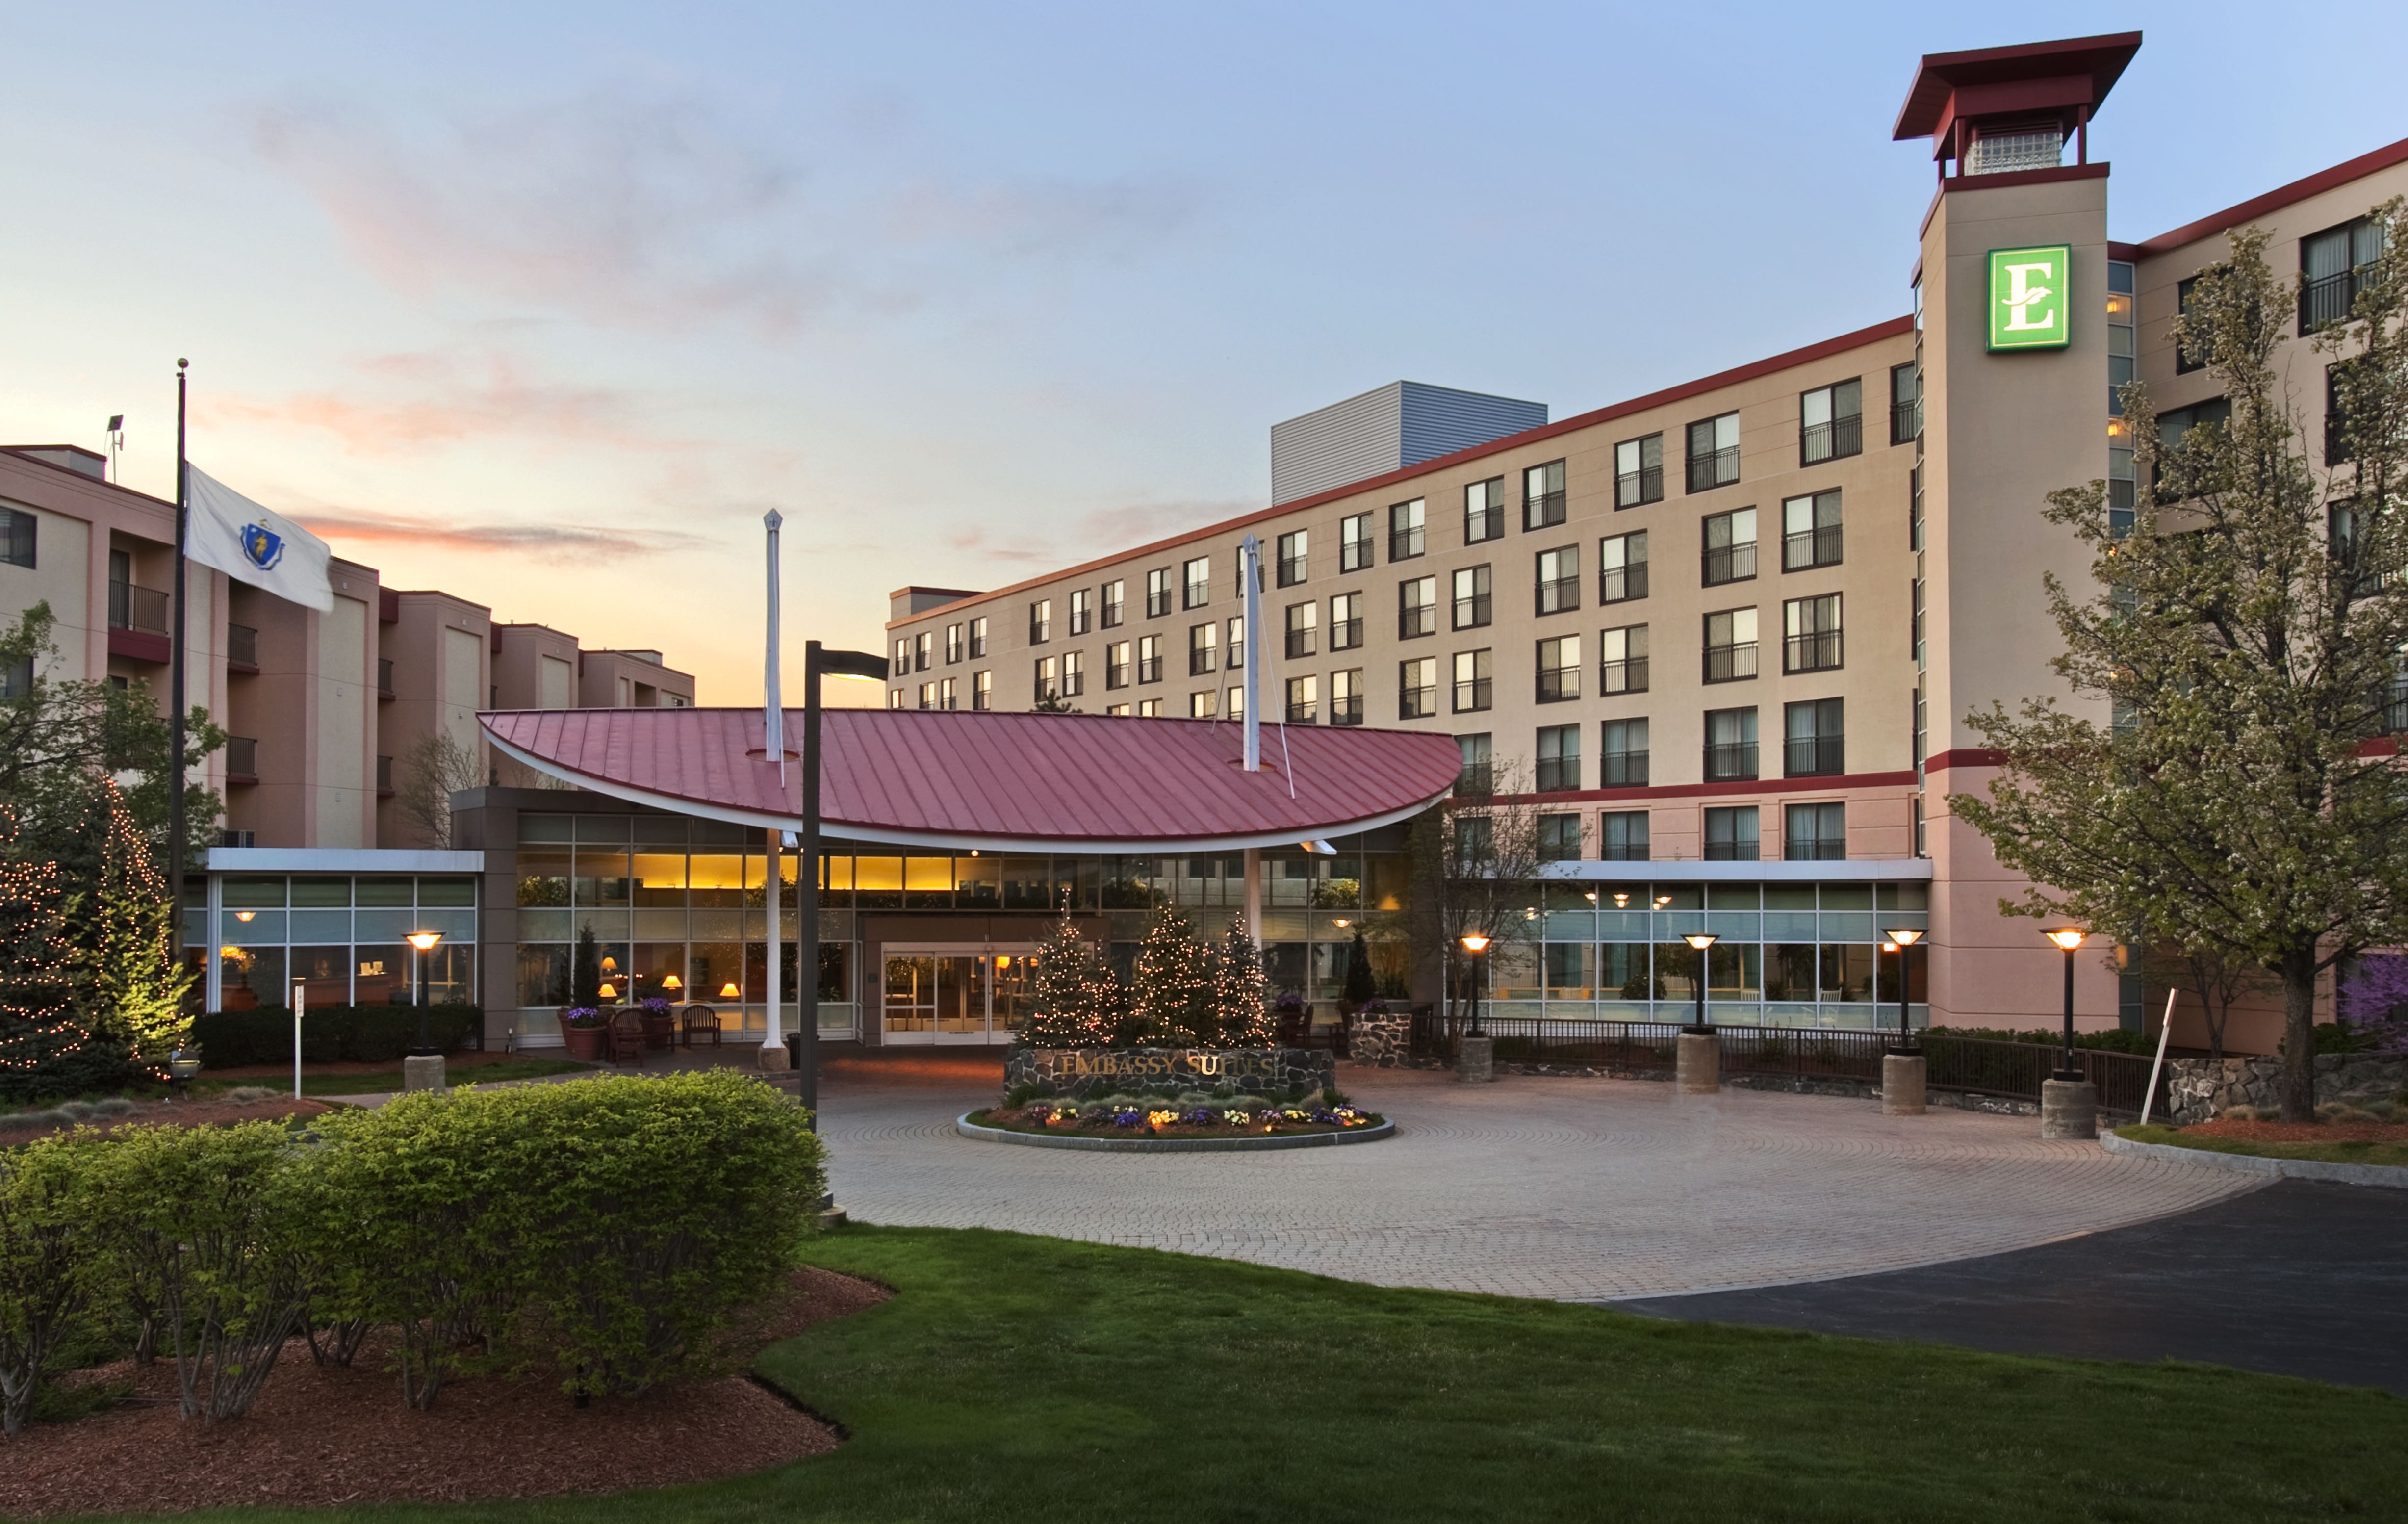 Rockbridge selected Pyramid Hotel Group which has experience in the Greater Boston area to operate the hotel